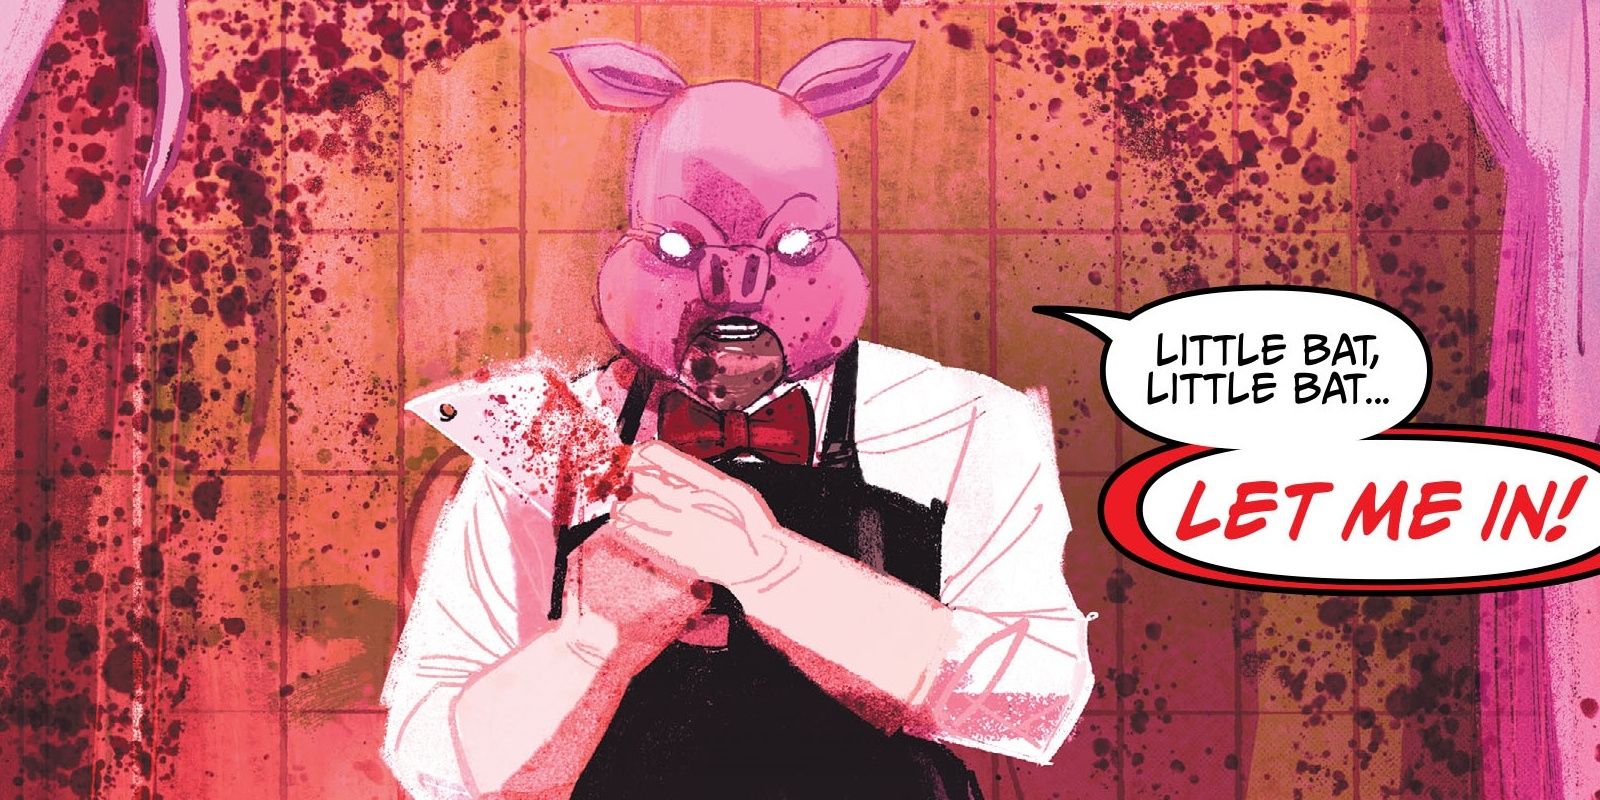 Professor Pyg is another more recently-introduced Batman supervillain in the comics